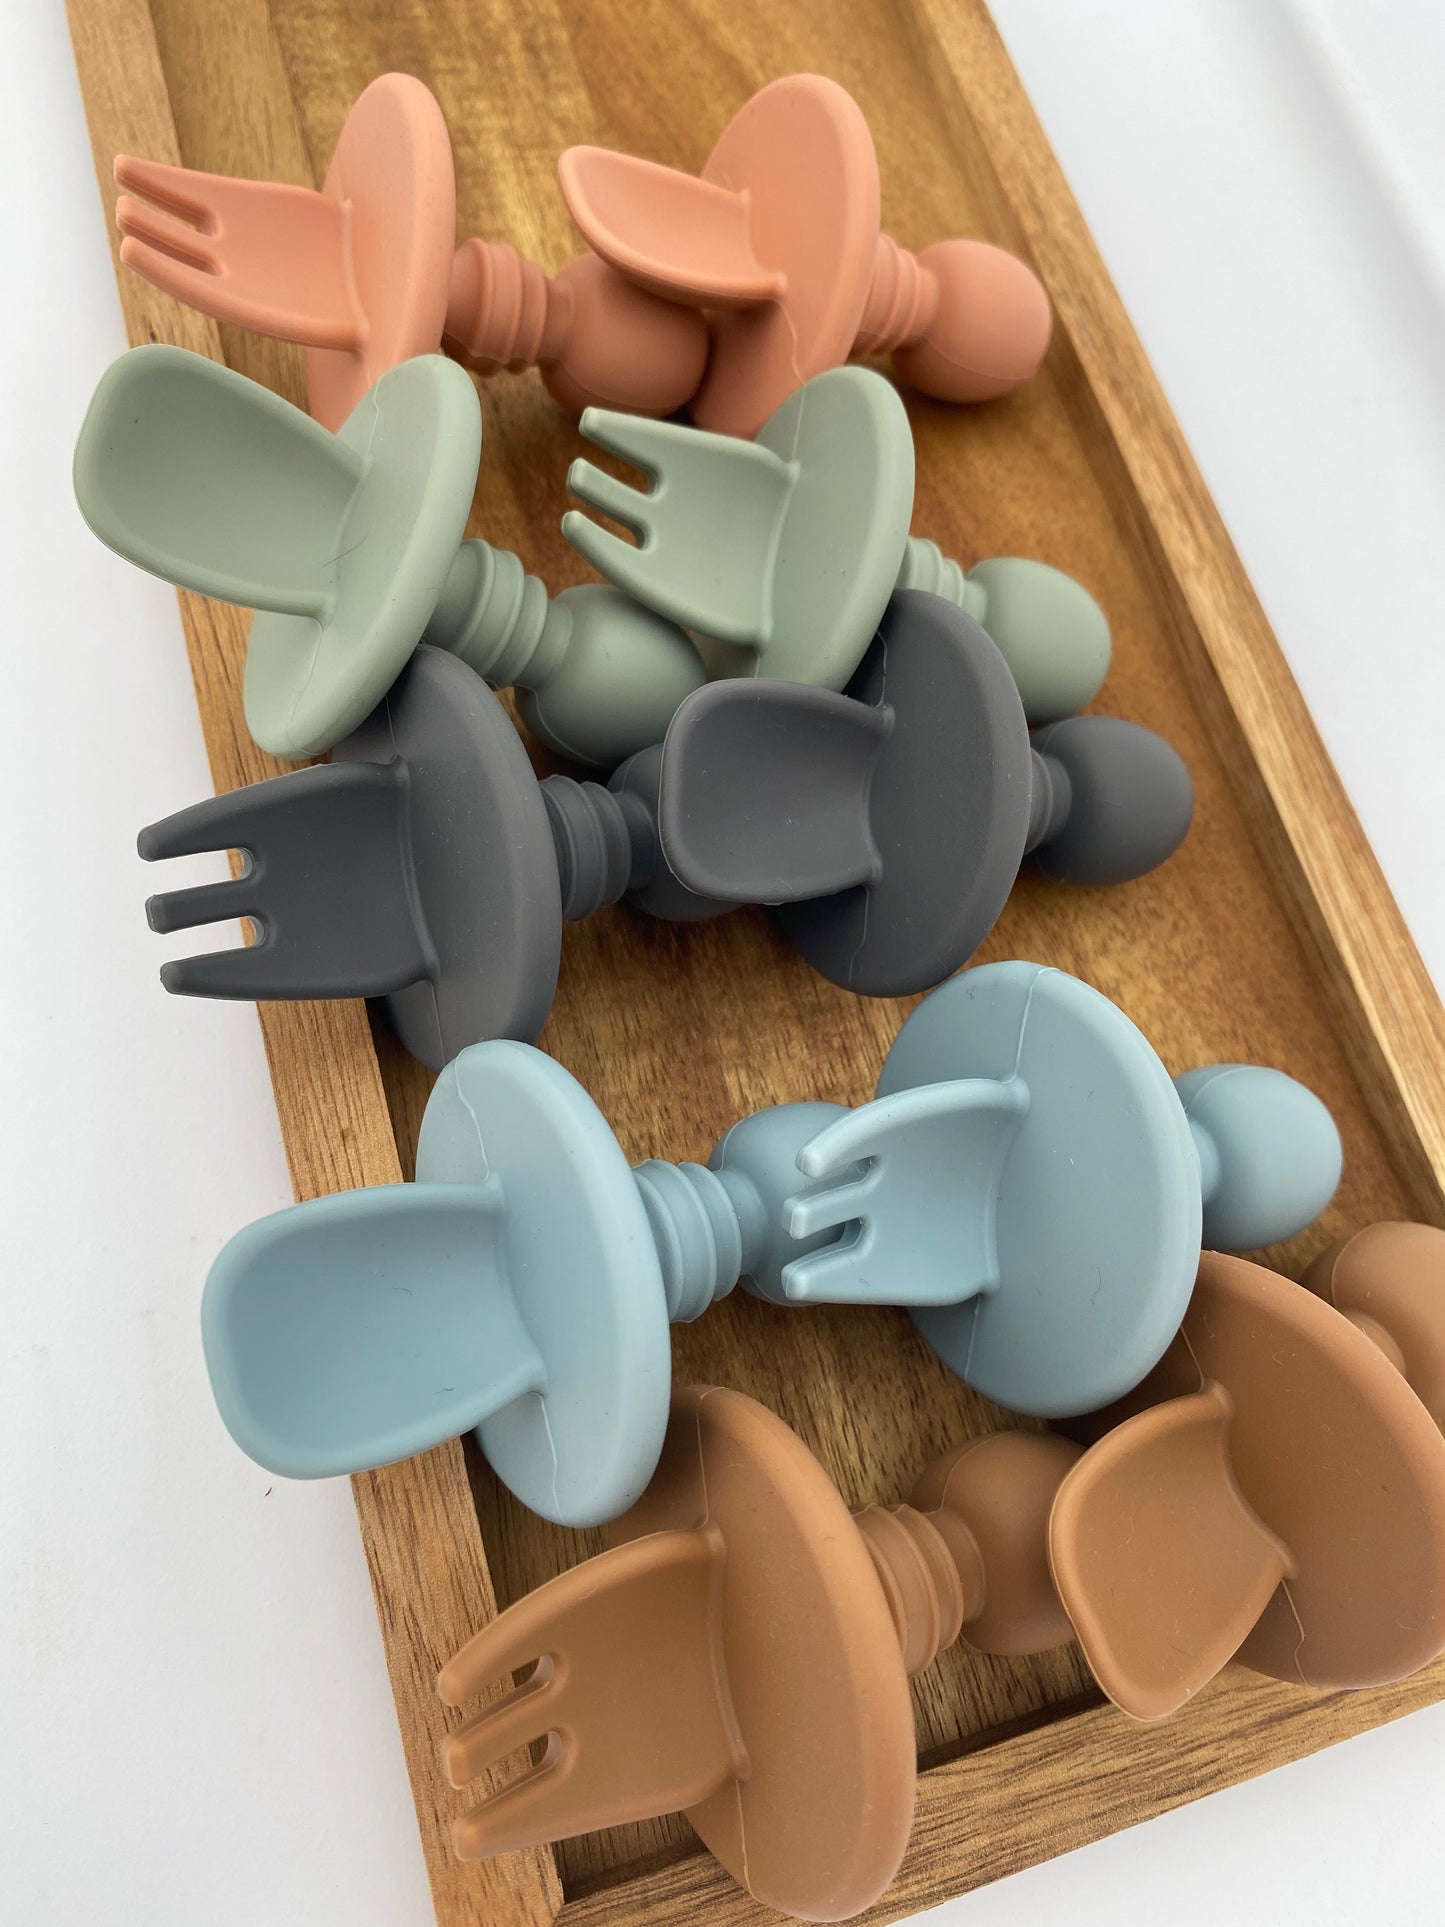 Baby Spoon & Fork Set